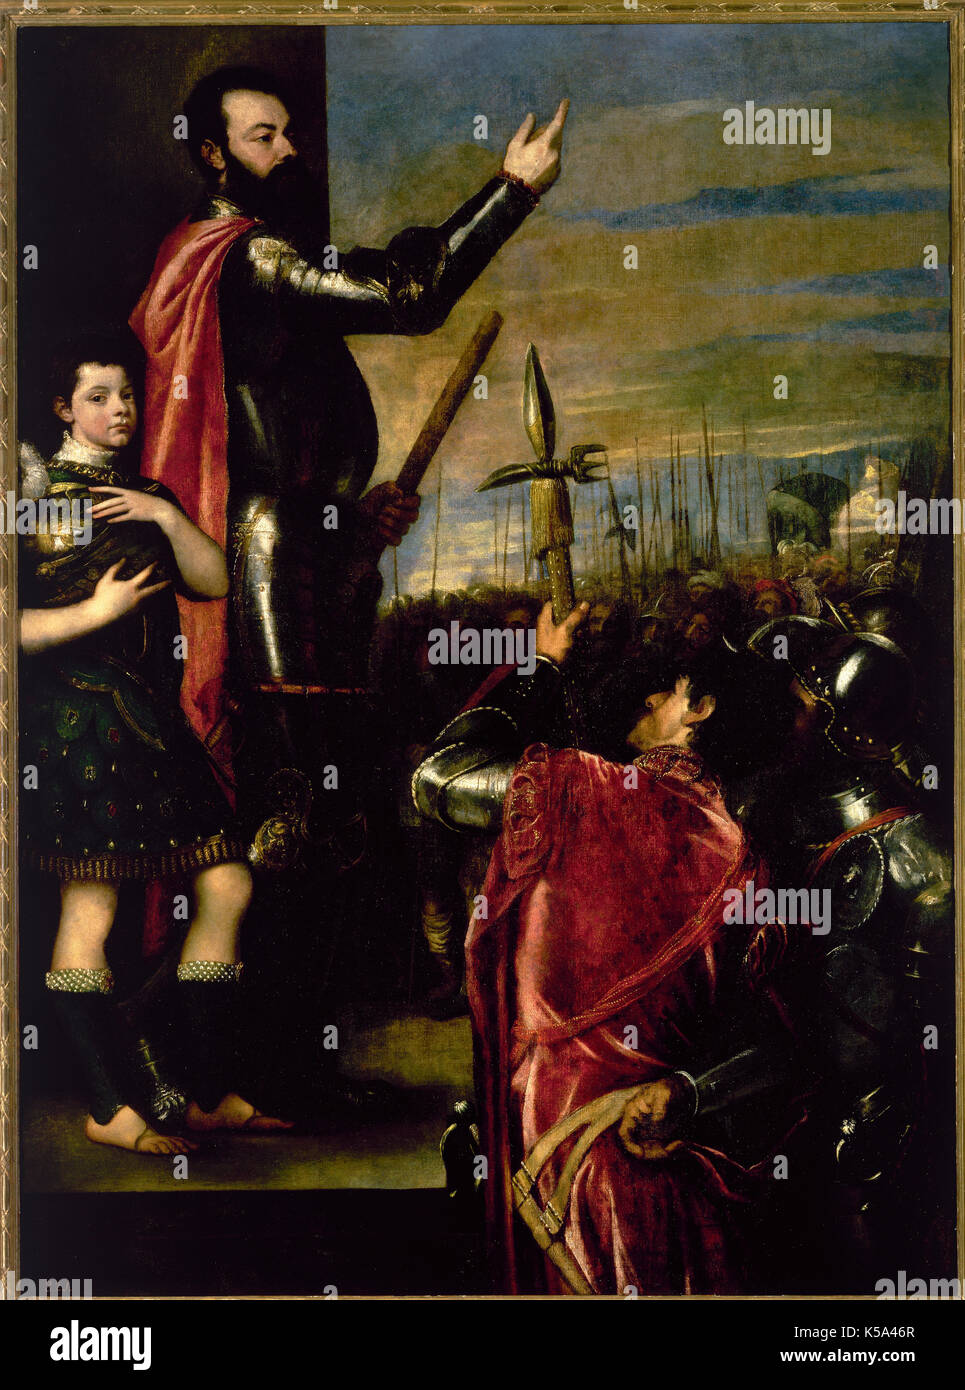 Marquis of Vasto. Alfonso de Avalos y de Aquino (1502-1546). Spanish military. He fought in the Battle of Pavia. Allocution of the Marquis of Vasto to its soldiers, 1540-1541. Altough it is considered a portrait of Avalos, the speech is not such. It would be an historical event happened in 1537. Avalos, the Marquis of Vasto, repressed a mutiny of Spanish troops quartered in Lombardy. Oil on canvas. Painting by Vecellio del Gregorio Tiziano, painter of the Italian School. The Prado Museum, Madrid, Spain. Stock Photo